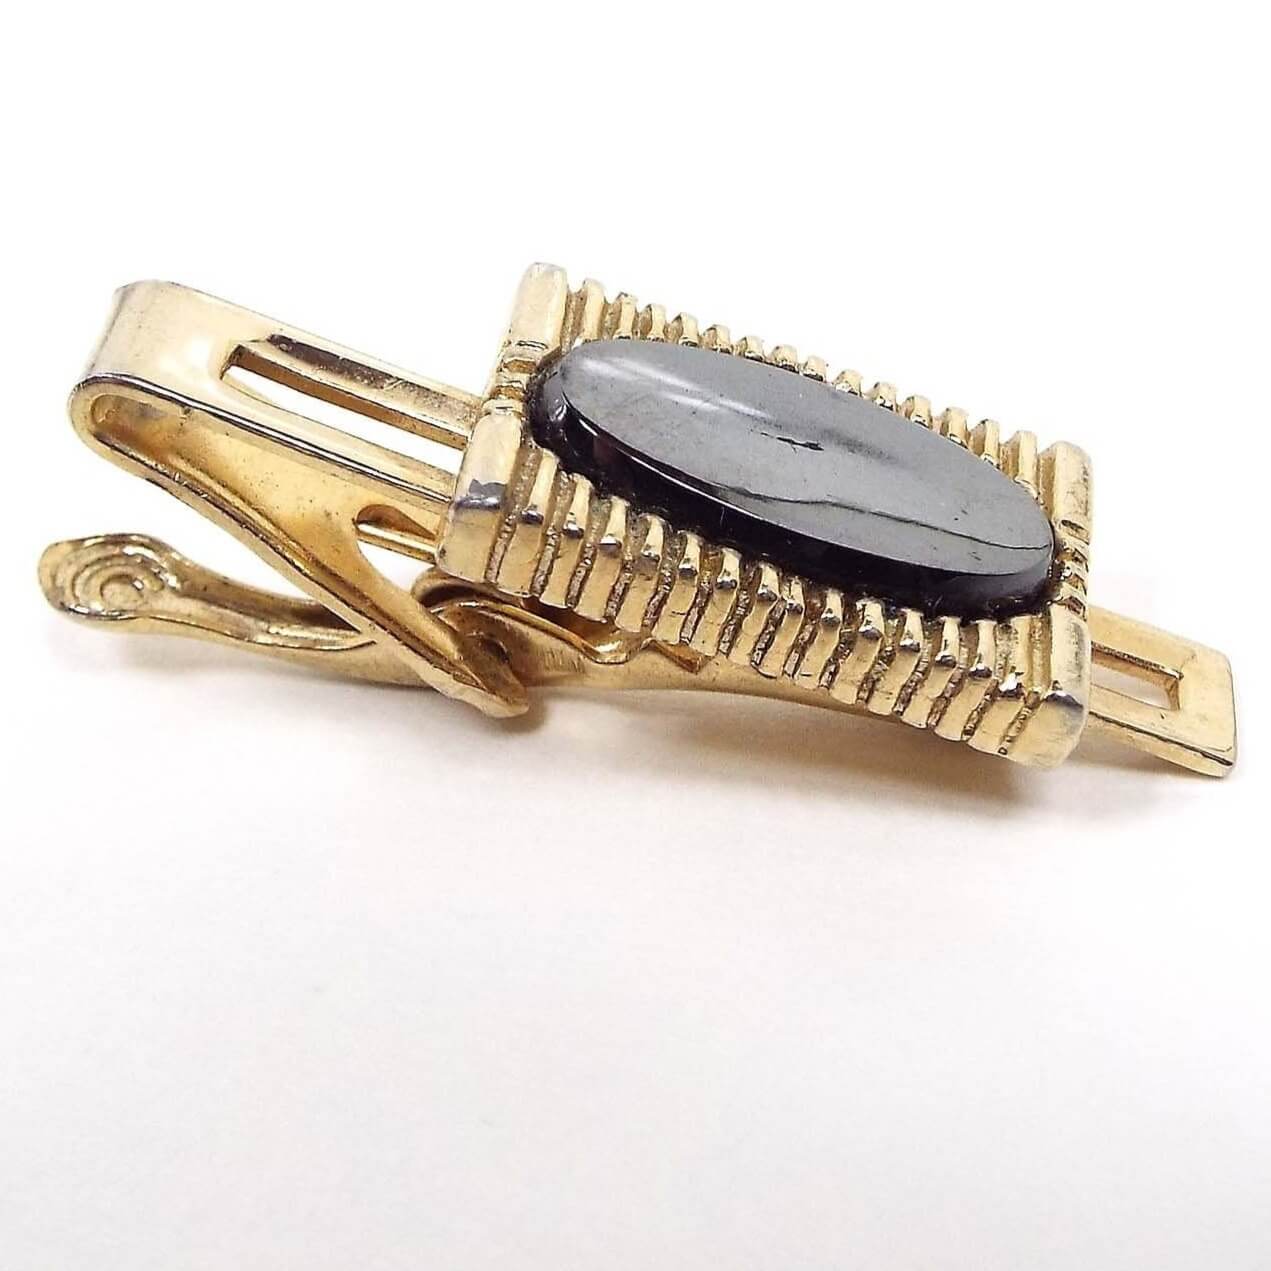 Angled front and side view of the Mid Century vintage hematite tie clip. The metal is gold tone in color. There is a striped rectangle in the middle with an oval hematite cab.